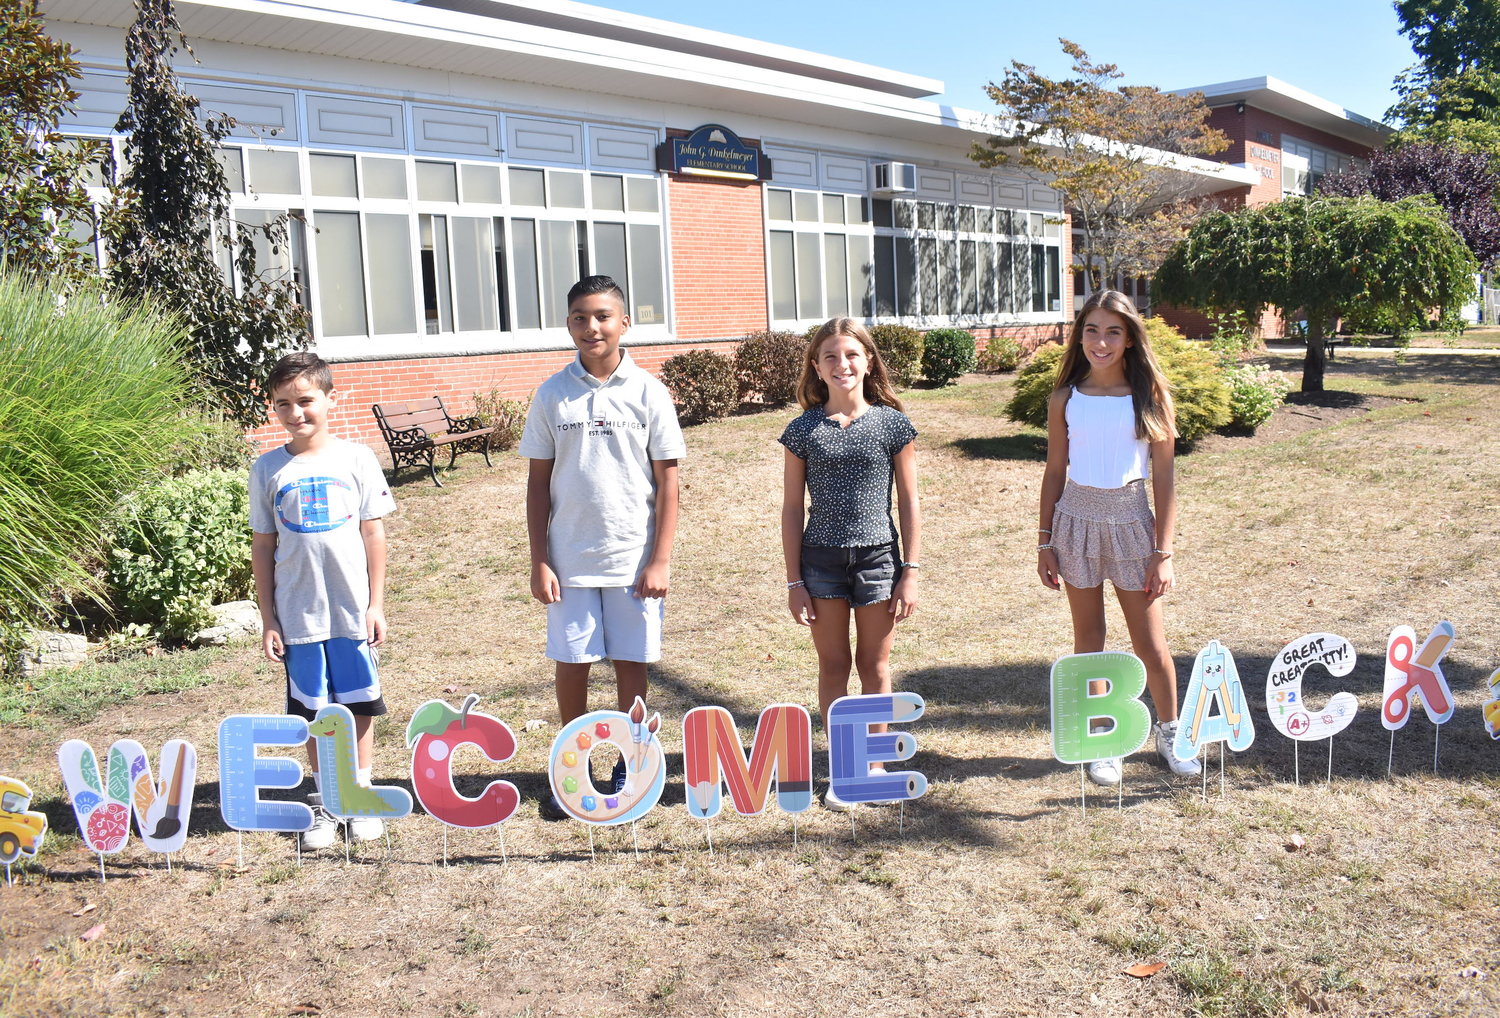 John G. Dinkelmeyer Elementary School sixth graders, from left, Lucas Maresco, Aaron Boodhram, Garifalia Vatougios and Kaylee Gangi stopped by the first day photo station on Sept. 1.